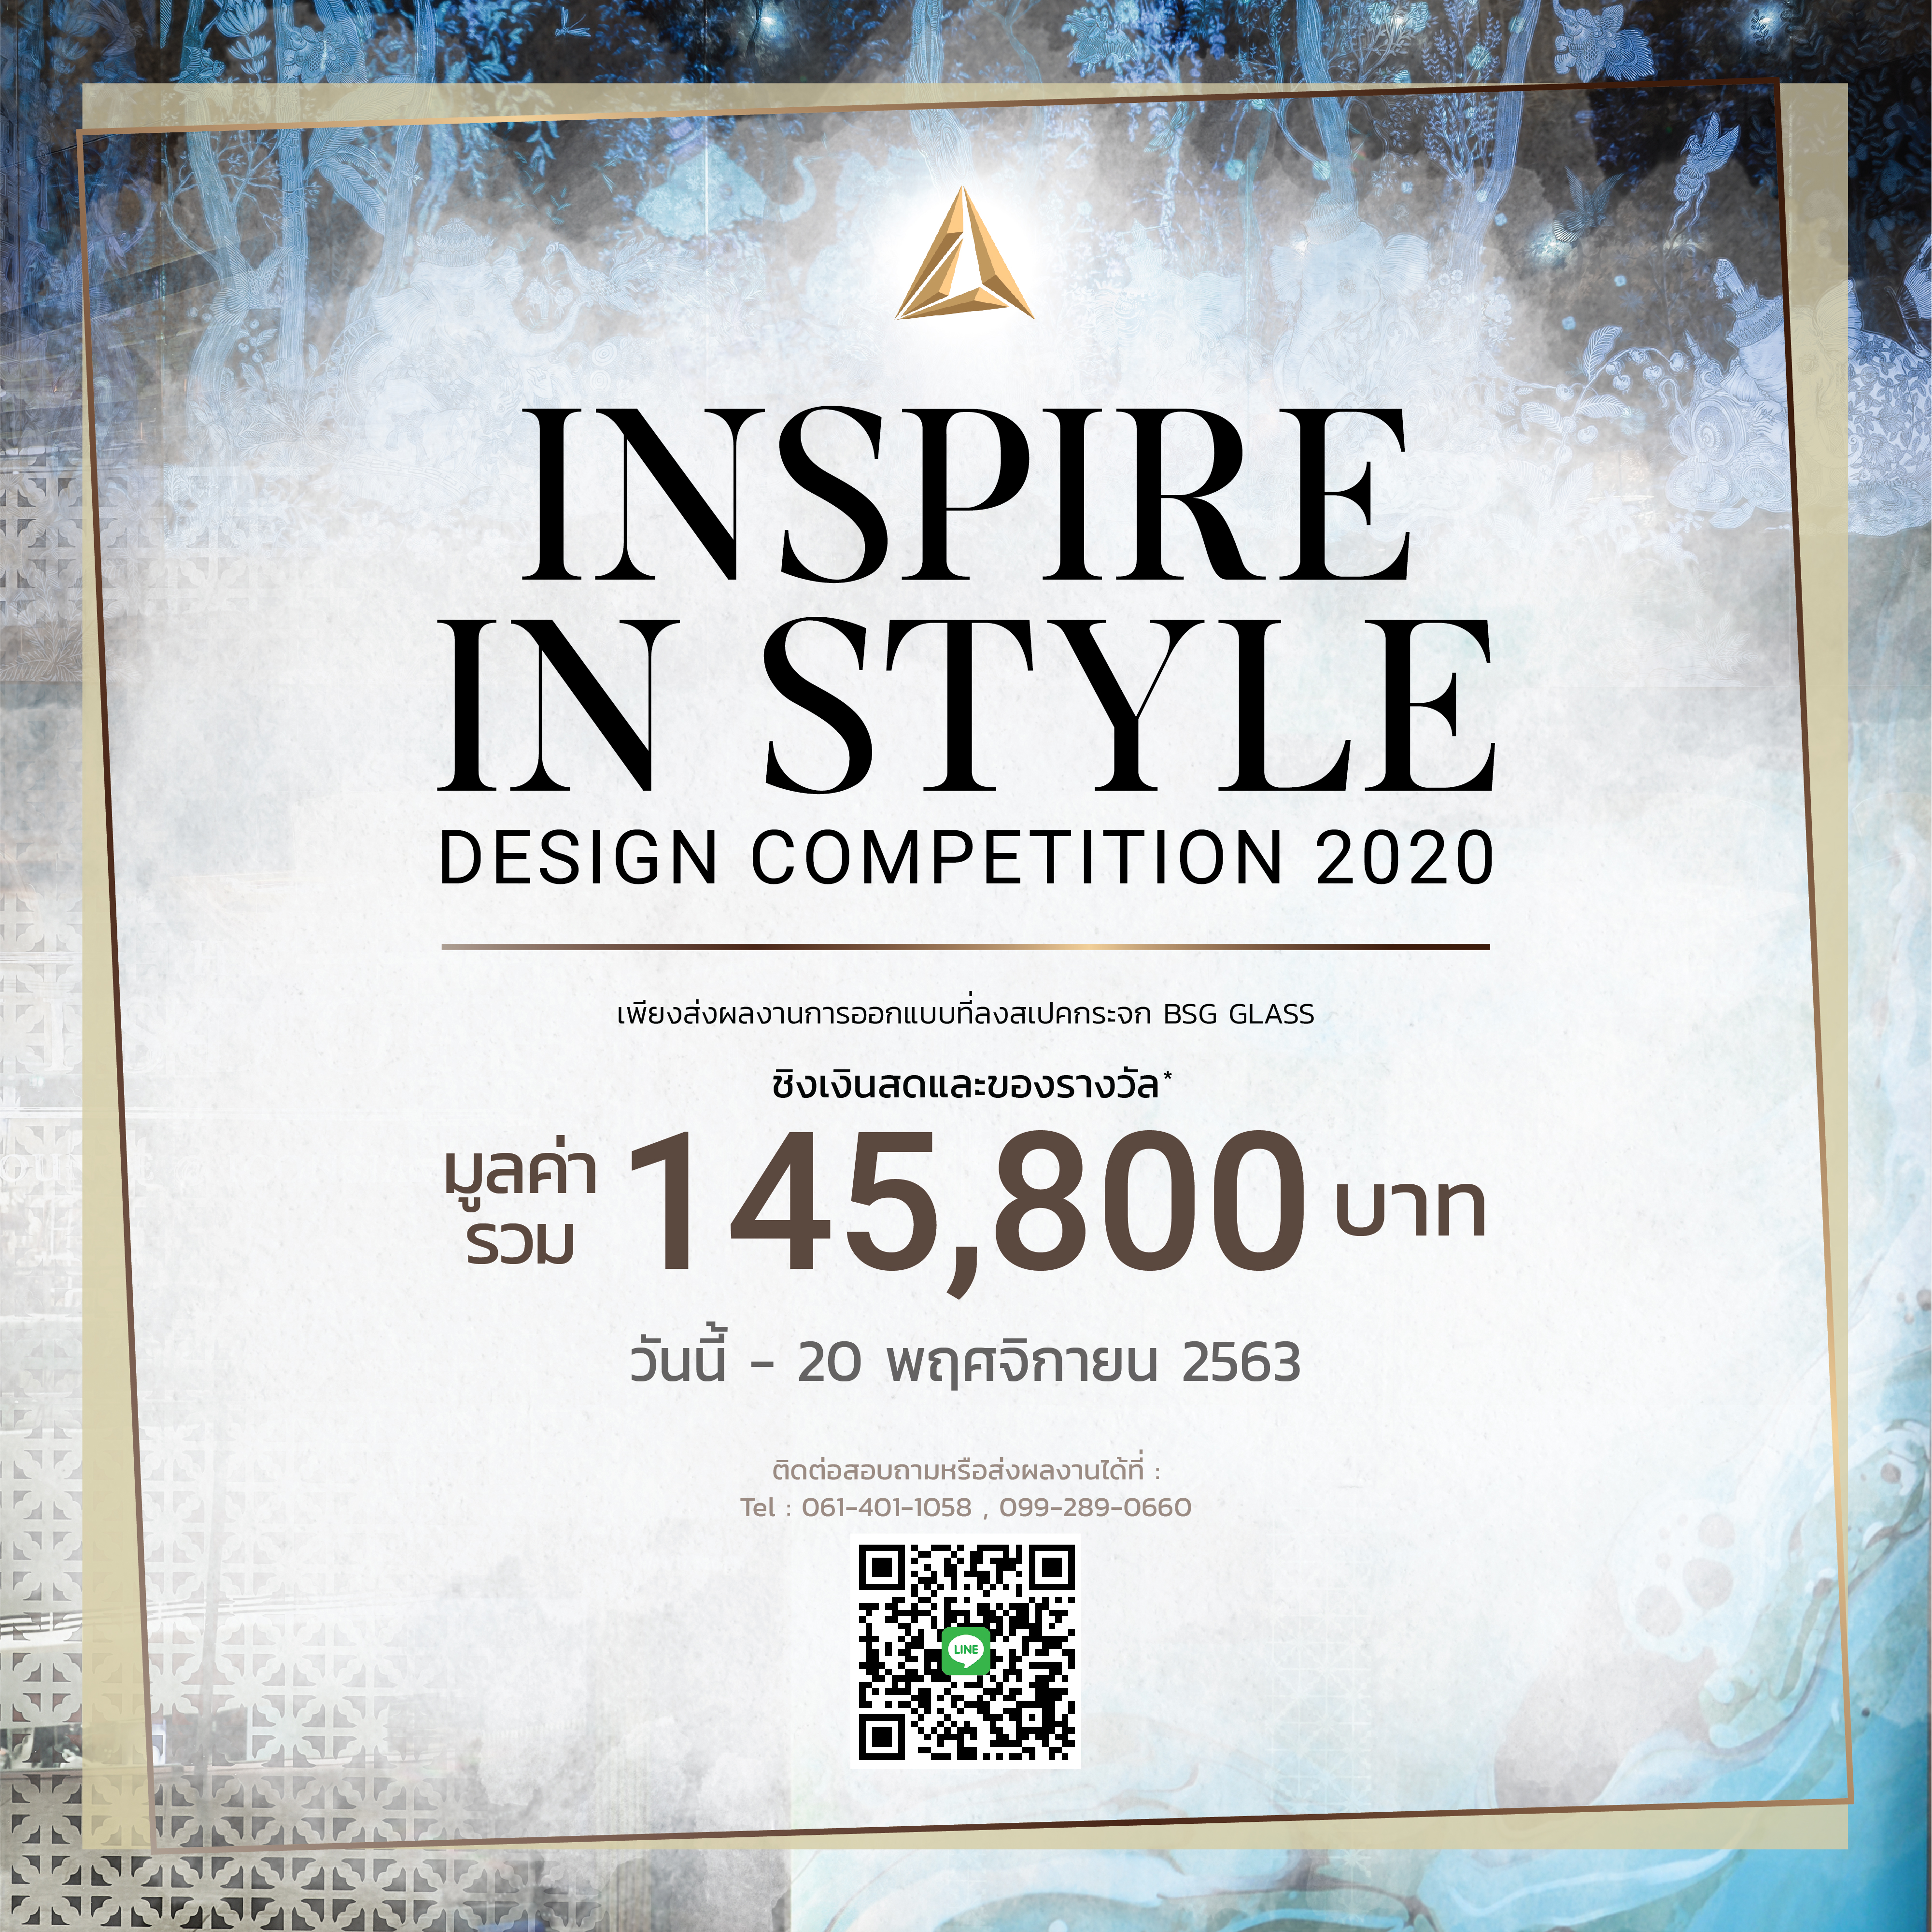 Inspire in Style, Design Competition 2020